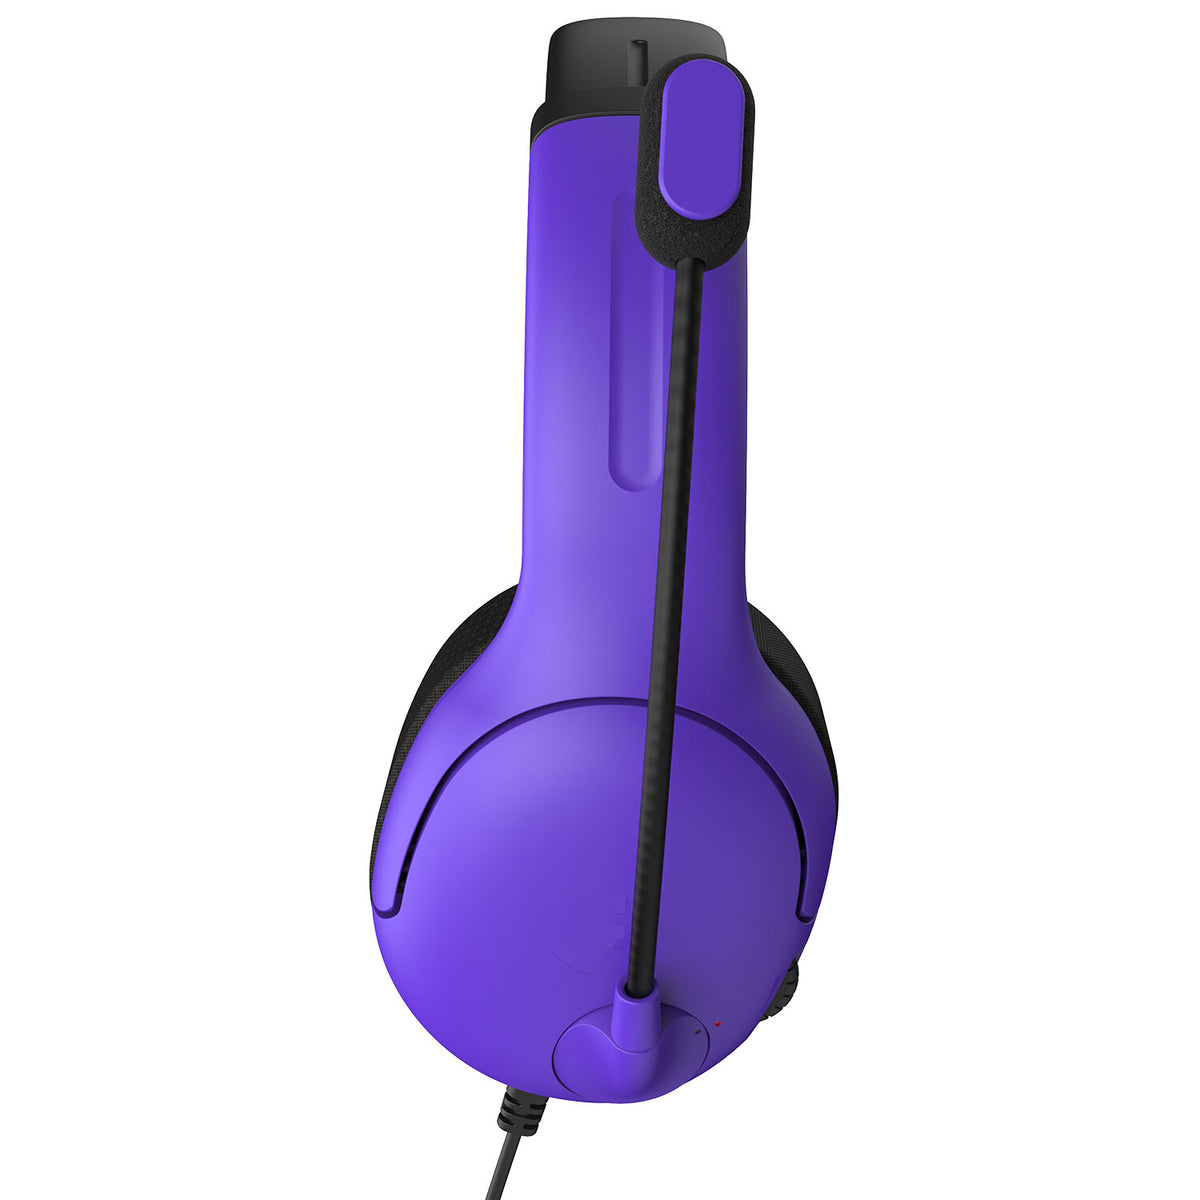 PDP Nebula Ultra Airlite - Wired Gaming Headset in Violet